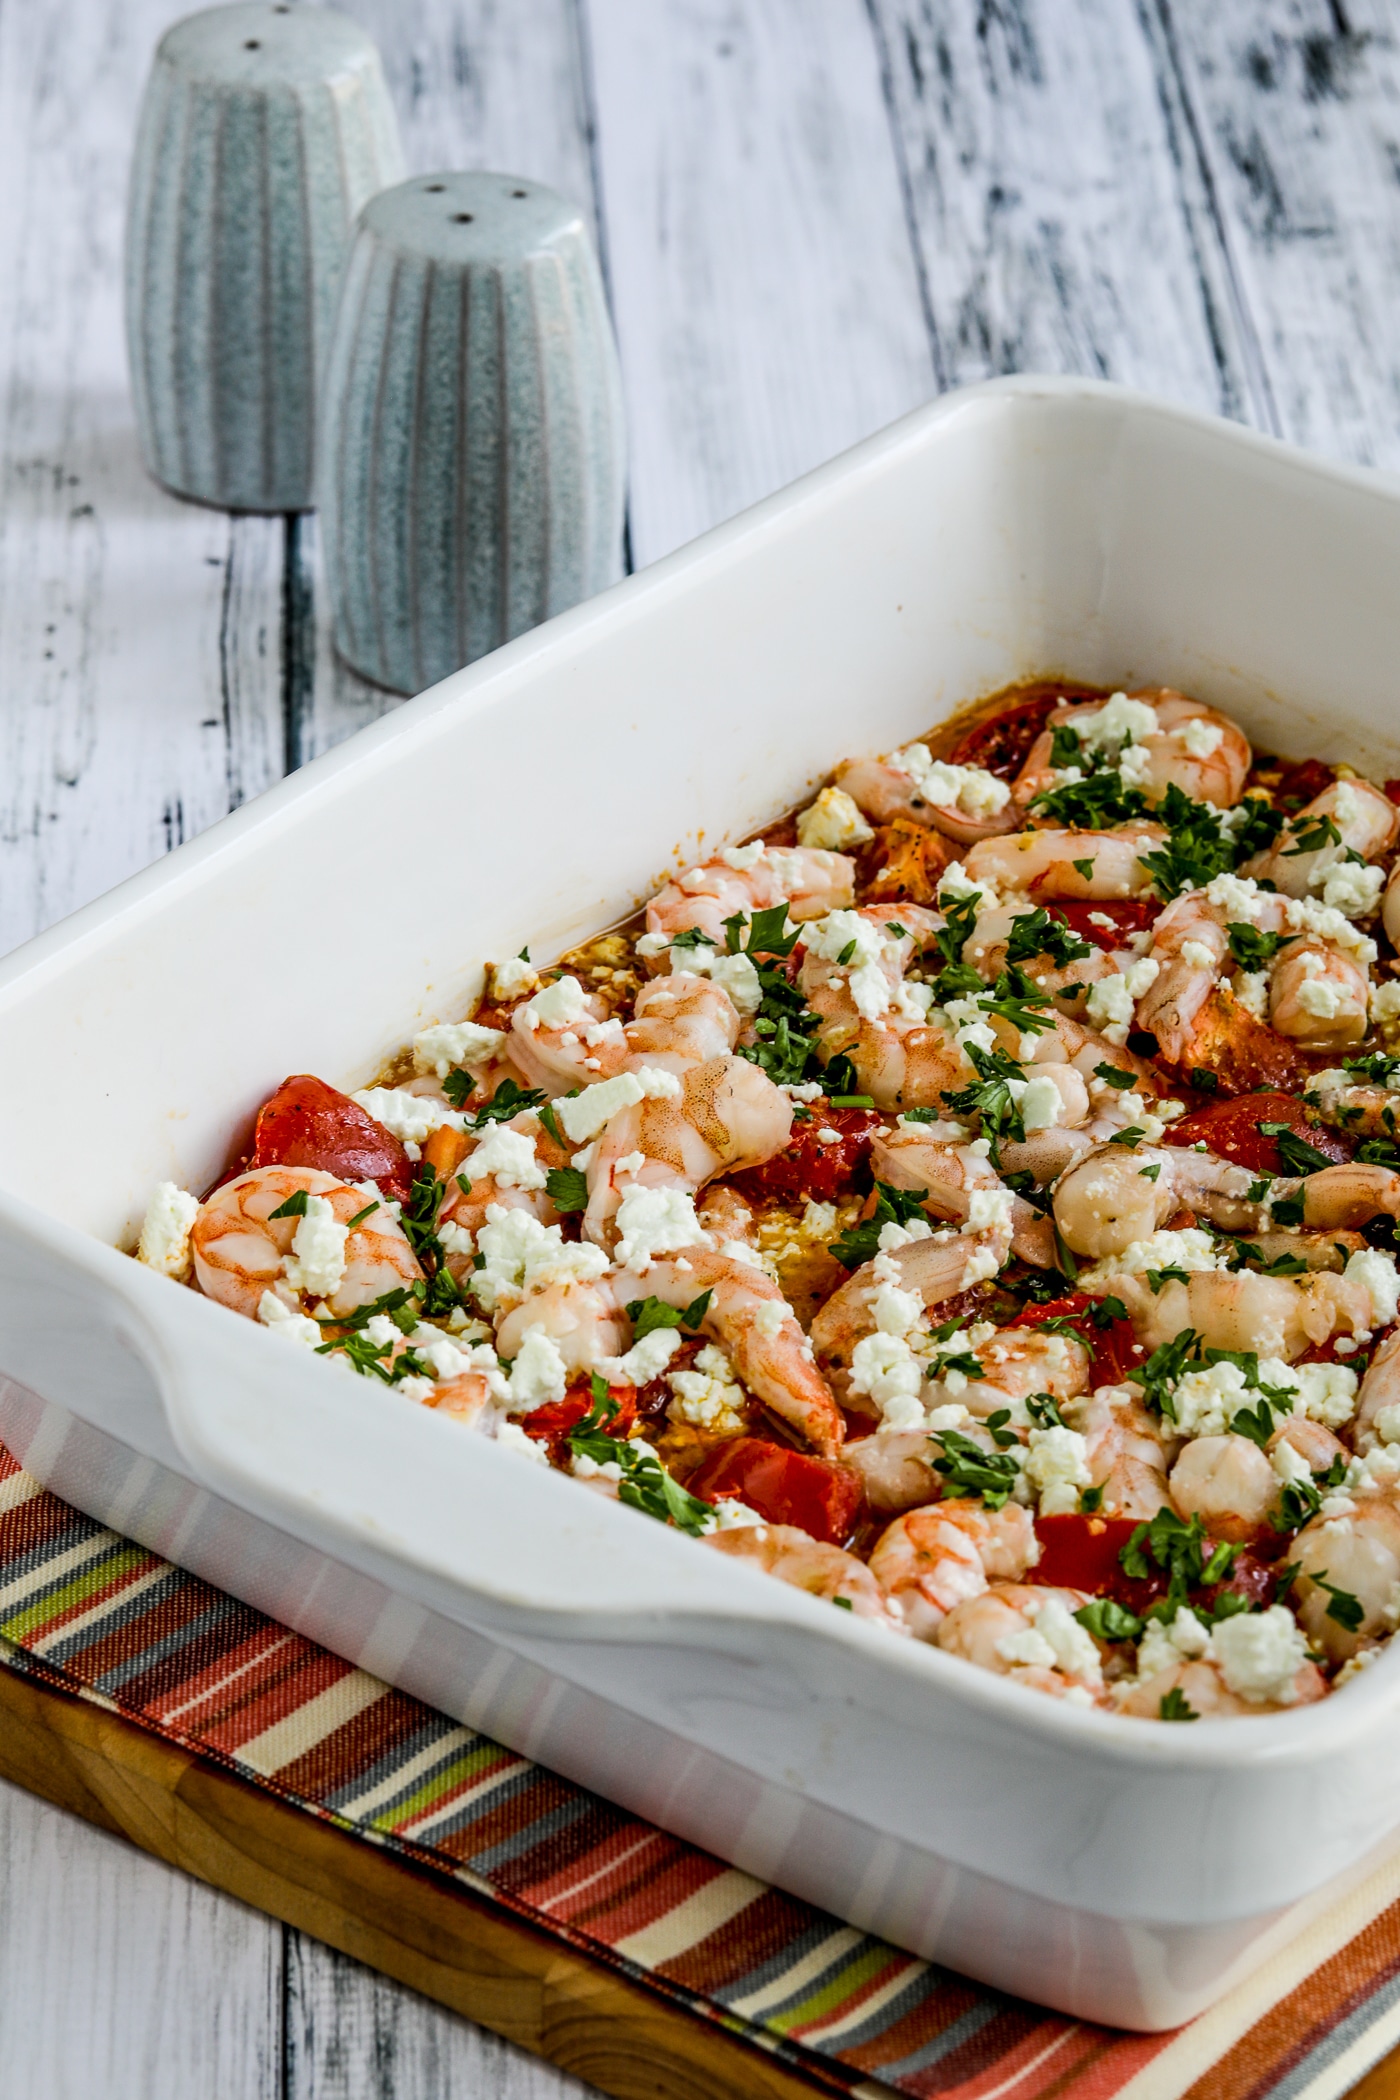 Tomatoes and roasted shrimp with feta cheese indicated in the serving dish after cooking